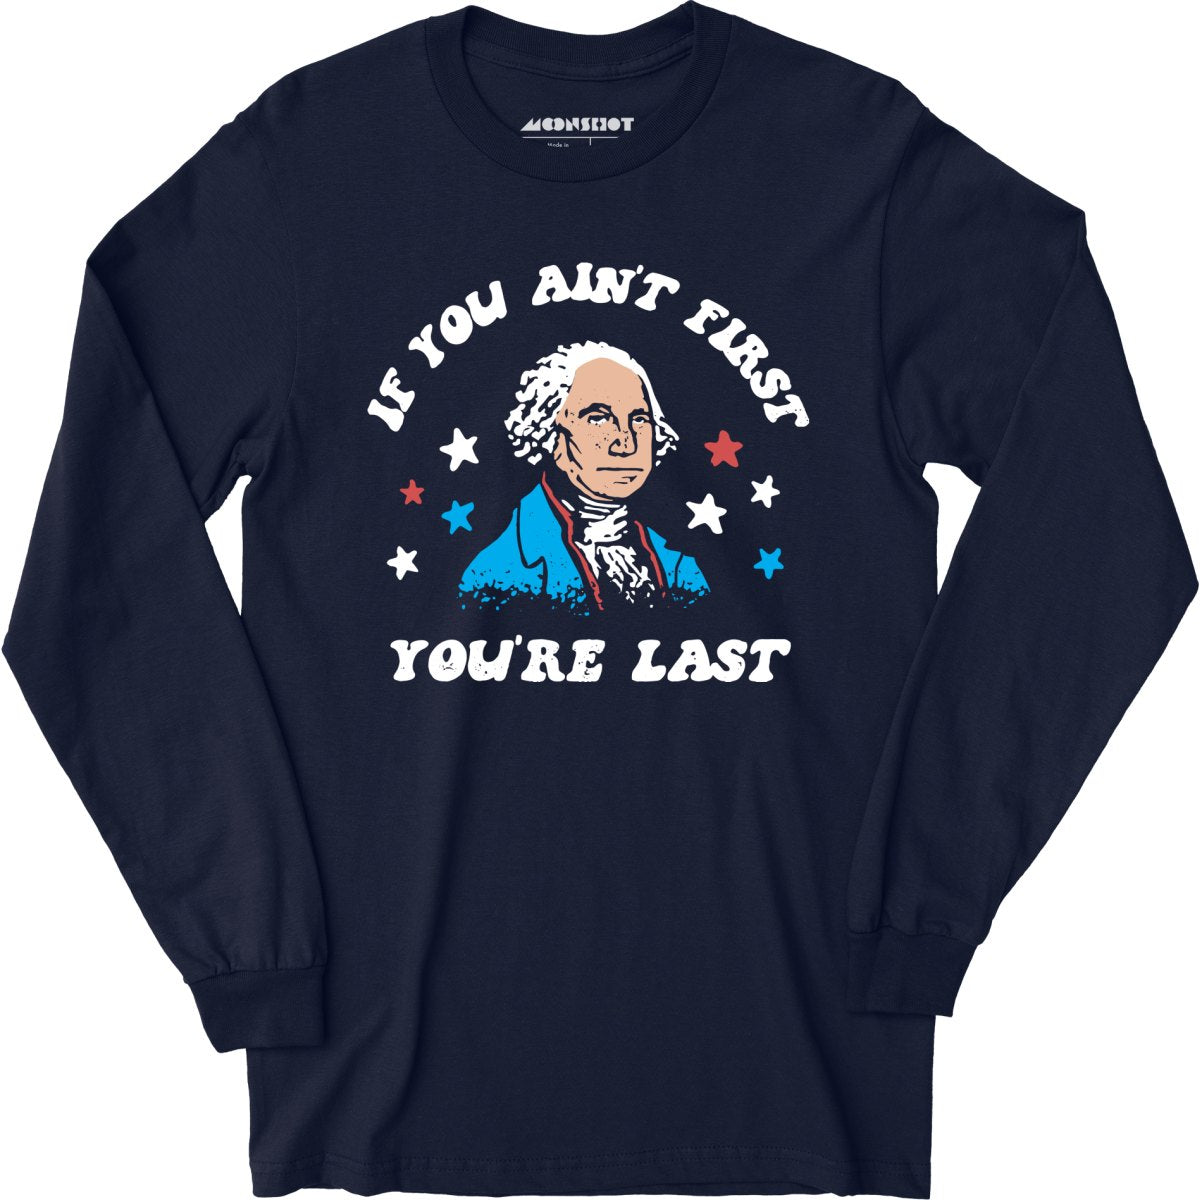 If You Ain't First You're Last - Long Sleeve T-Shirt